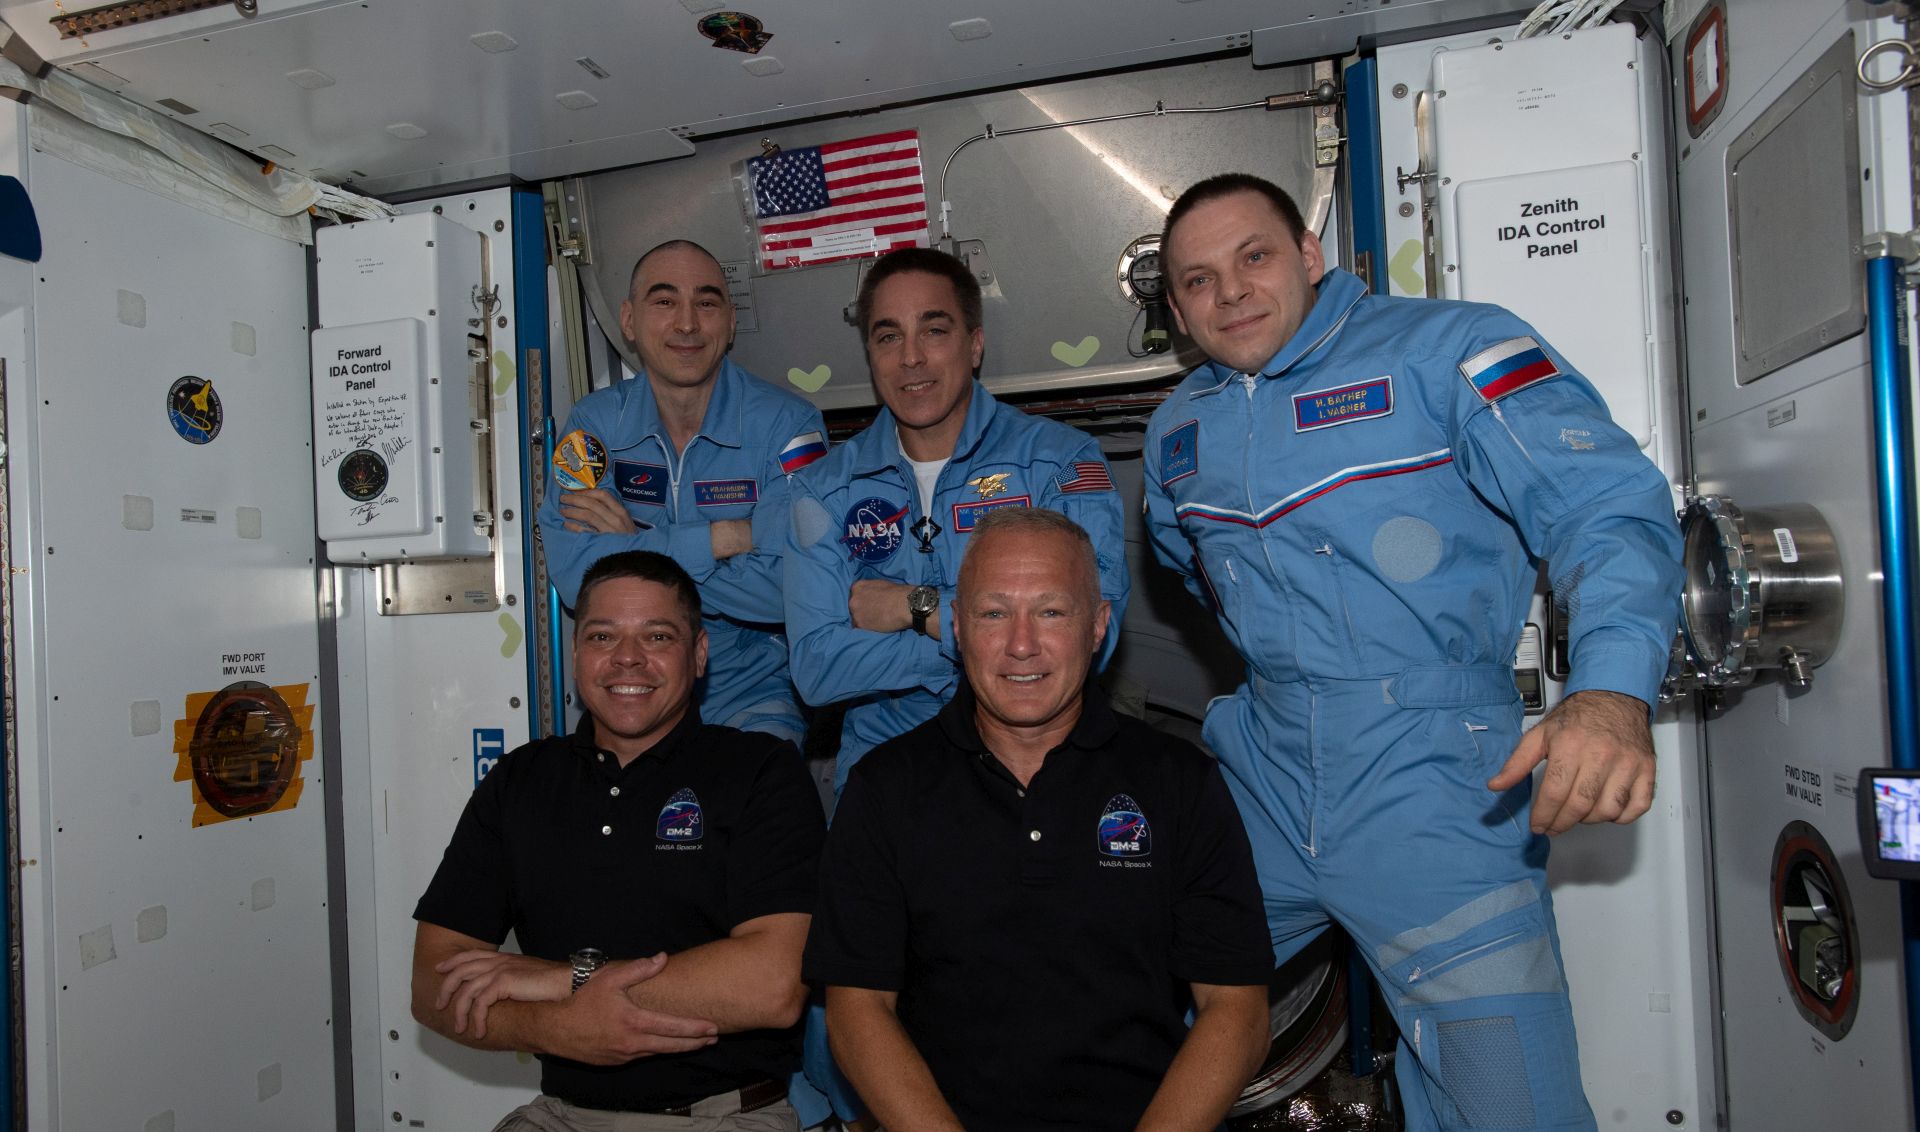 epa08568646 A handout picture made available by the National Aeronautics and Space Administration (NASA) shows newly-expanded Expedition 63 crew with NASA astronauts (front row, from L) Bob Behnken and Doug Hurley having just entered the International Space Station (ISS) shortly after arriving aboard the SpaceX Crew Dragon spacecraft, 31 May 2020 (issued 27 July 2020). In picture are NASA Commander Chris Cassidy (C, back row), flanked by Roscosmos Flight Engineers Anatoly Ivanishin (L) and Ivan Vagner (R). After two months aboard the International Space Station, astronauts Bob Behnken and Doug Hurley are planned to return home. The duo will undock with the SpaceX's Crew Dragon spacecraft from the ISS sometime on 01 August and then splashdown in the Atlantic Ocean on 02 August ending NASA's first crewed mission aboard a commercial spacecraft.  EPA/NASA HANDOUT  HANDOUT EDITORIAL USE ONLY/NO SALES